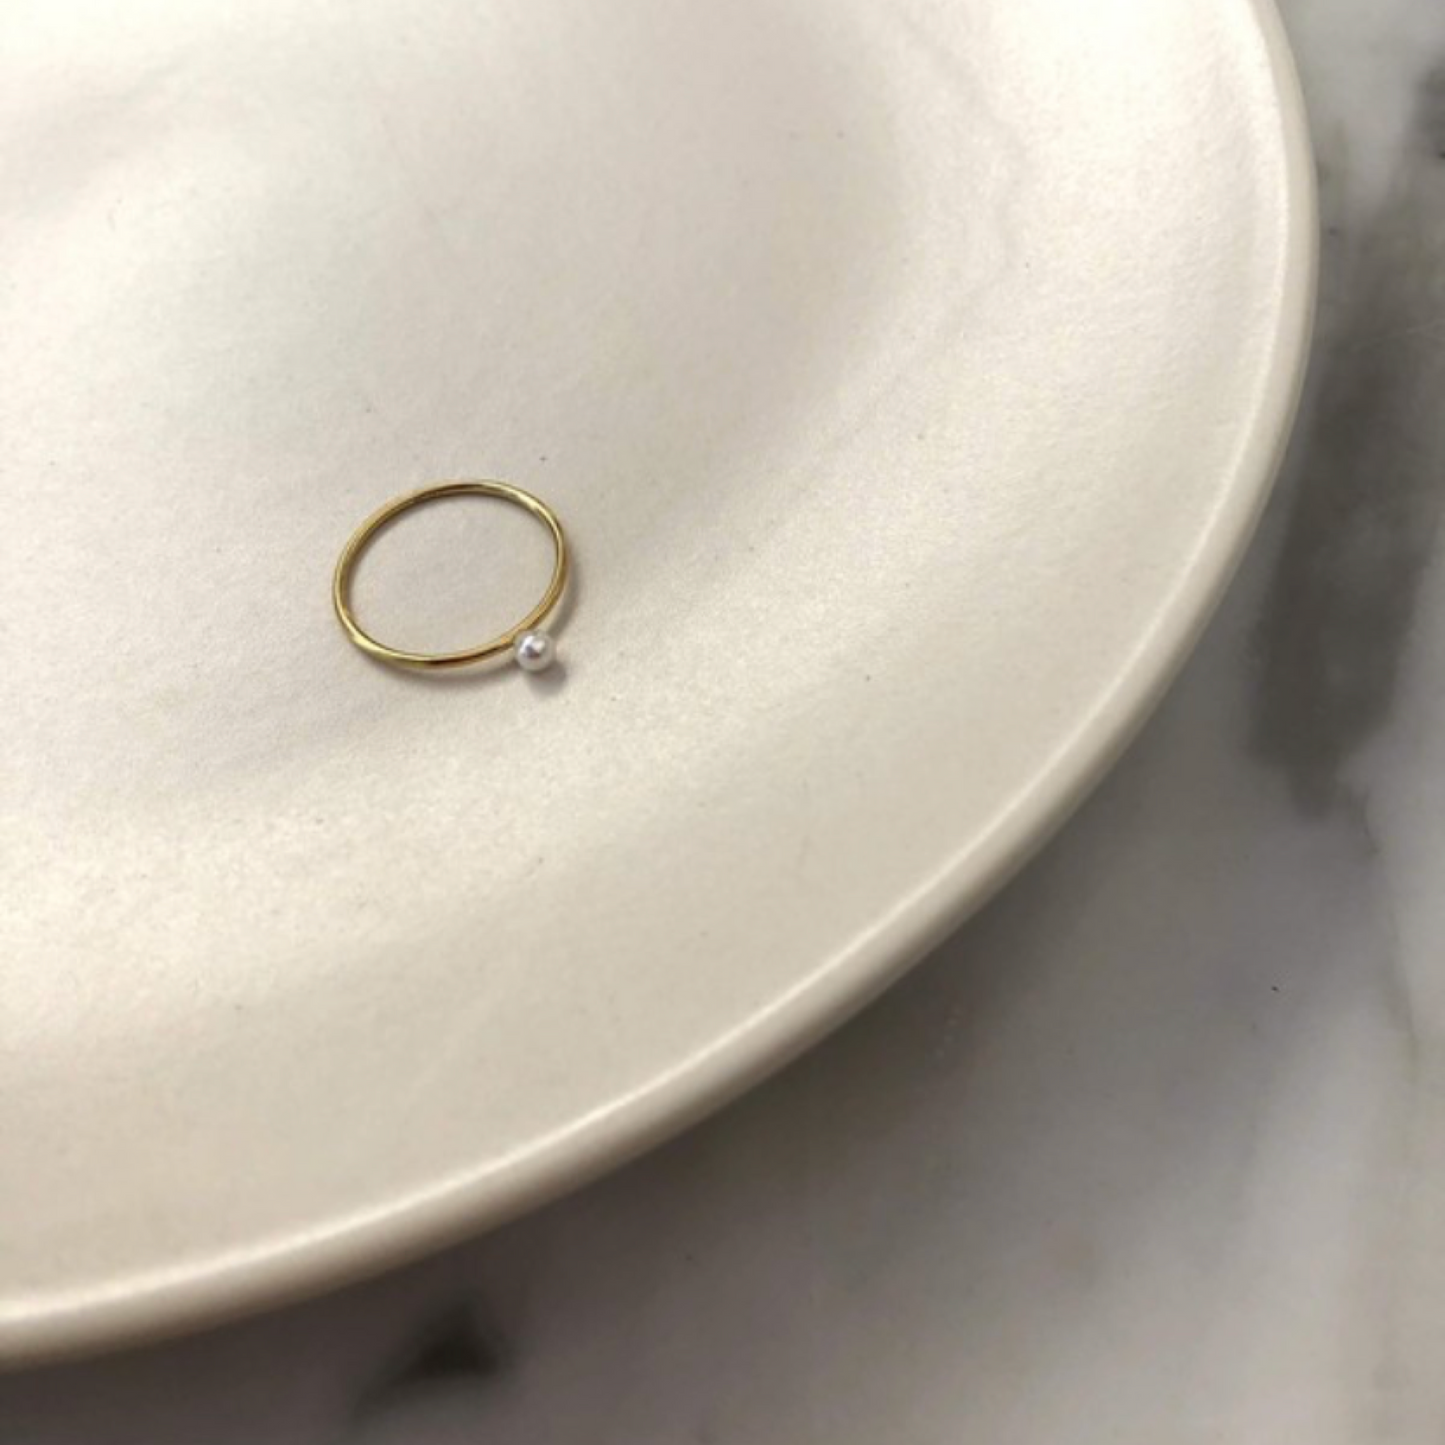 A TINY PEARL RING